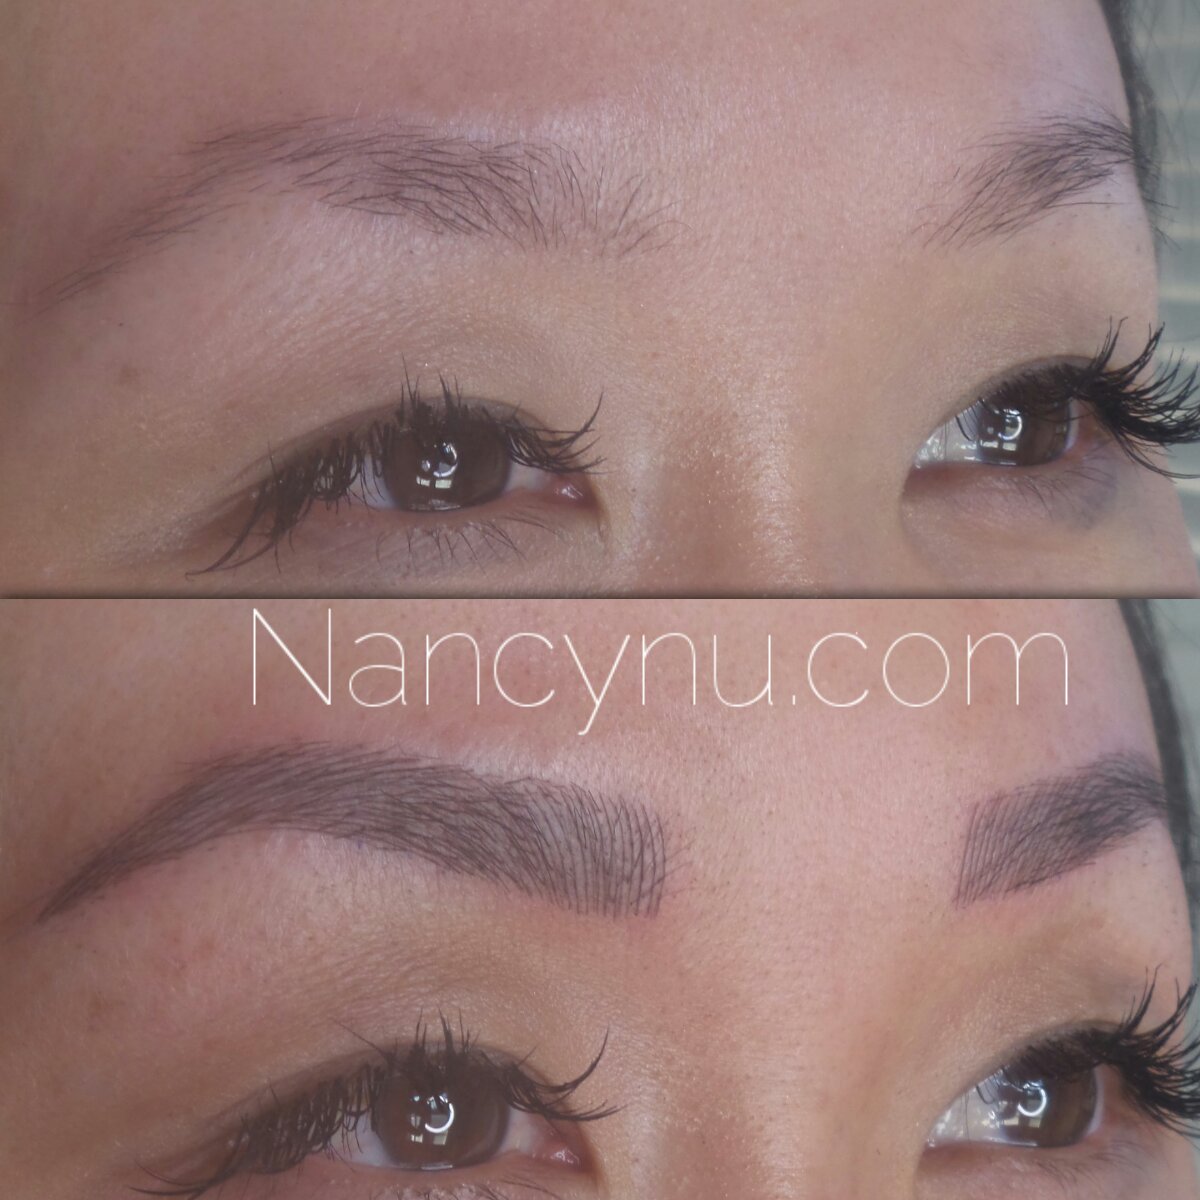 3D Embroidery / Microblading eyebrows - before and after, lasts for a year and a half, semi permanent.